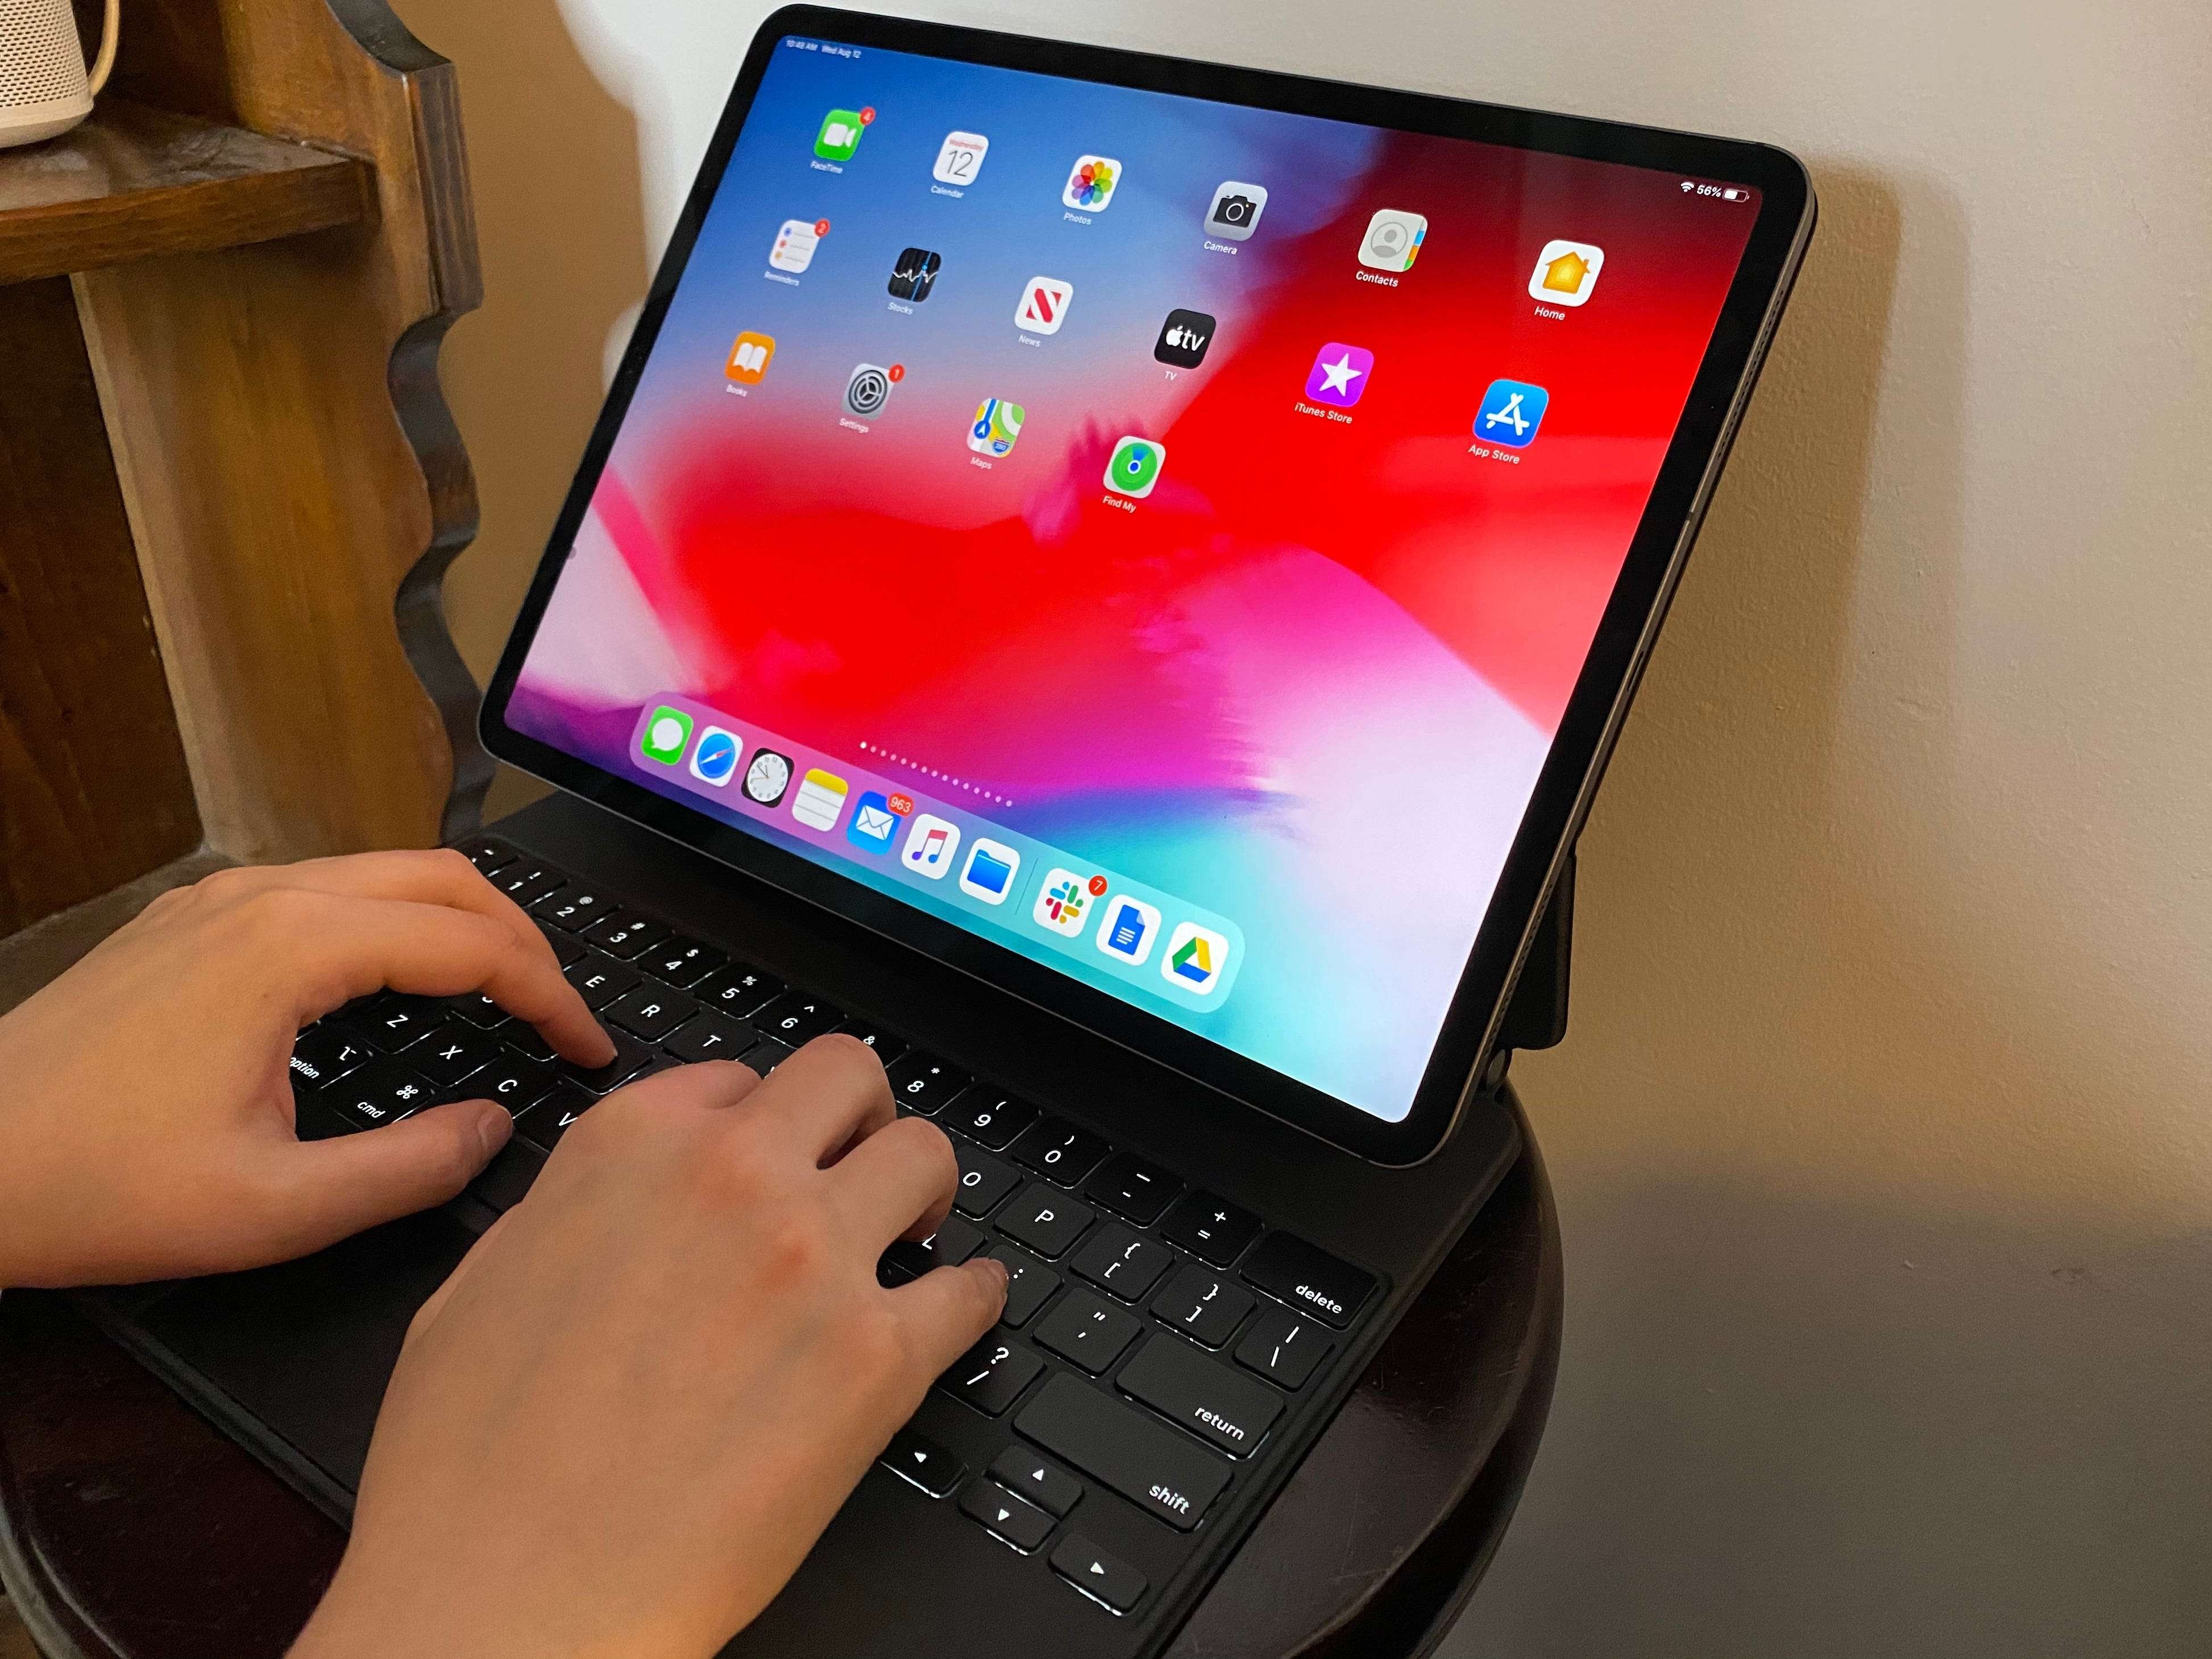 Ipad Pro With Magic Keyboard - After testing it over the weekend, i